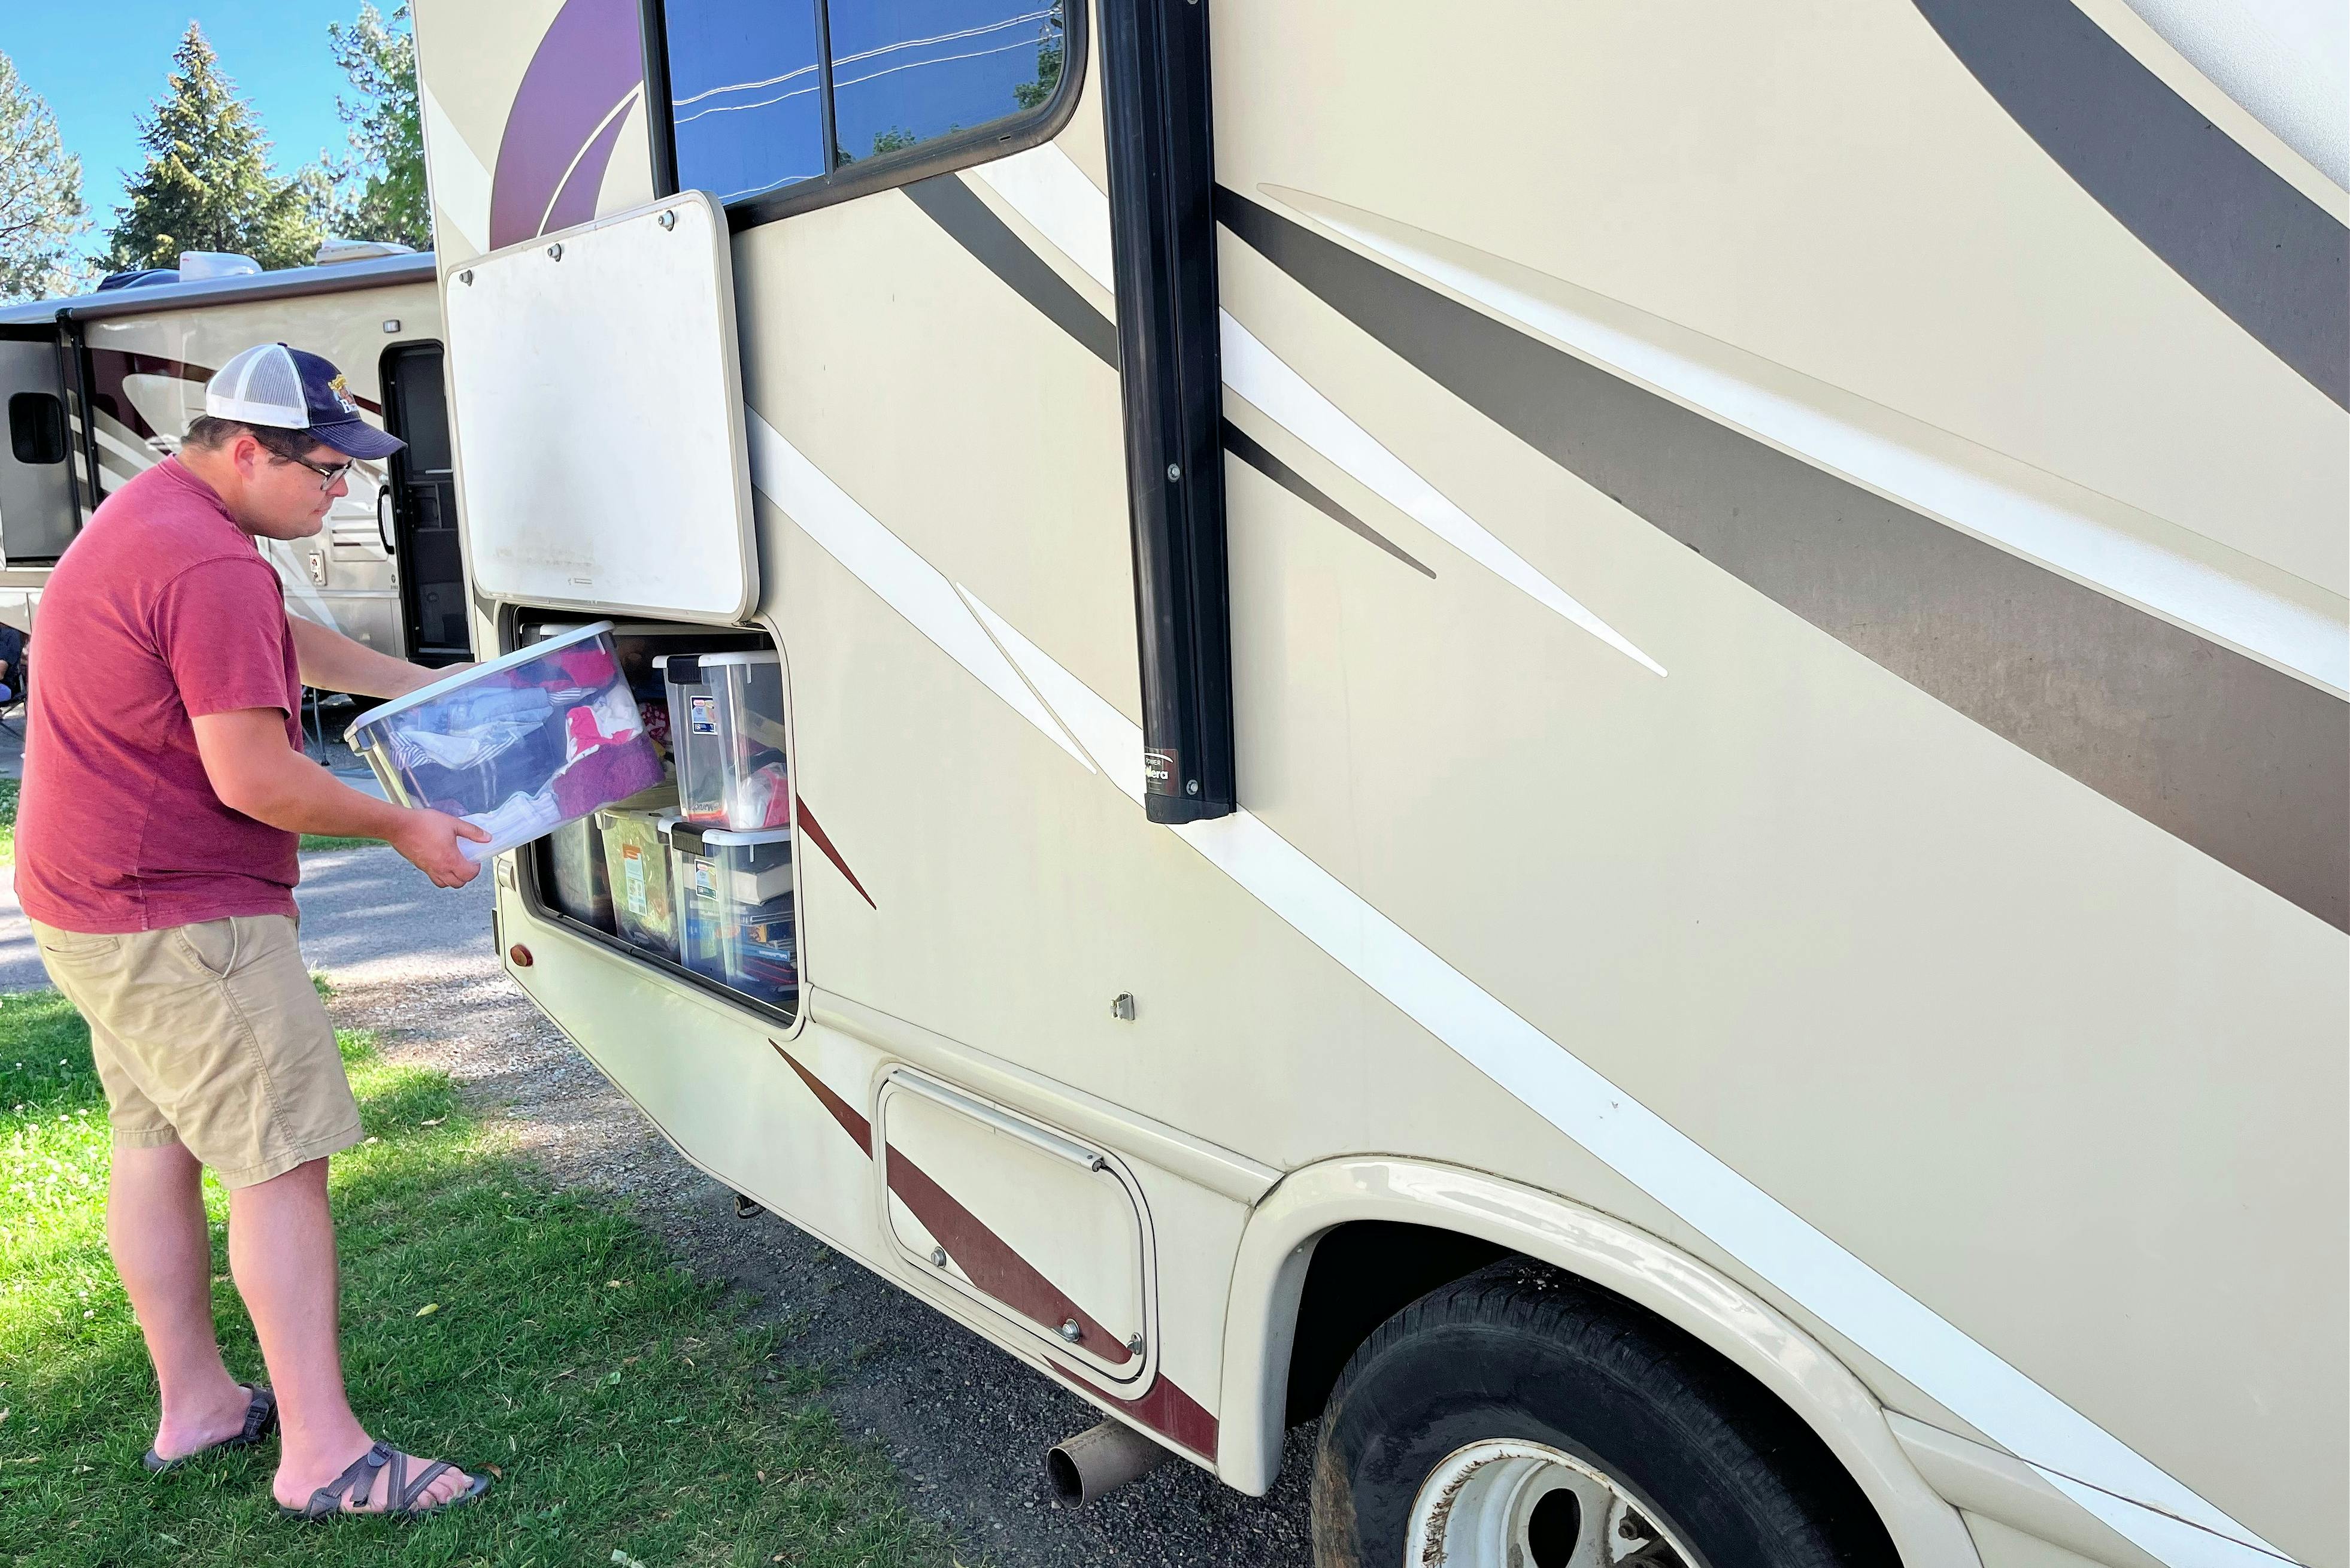 How To Maximize Storage And Organization In An RV - THOR Industries